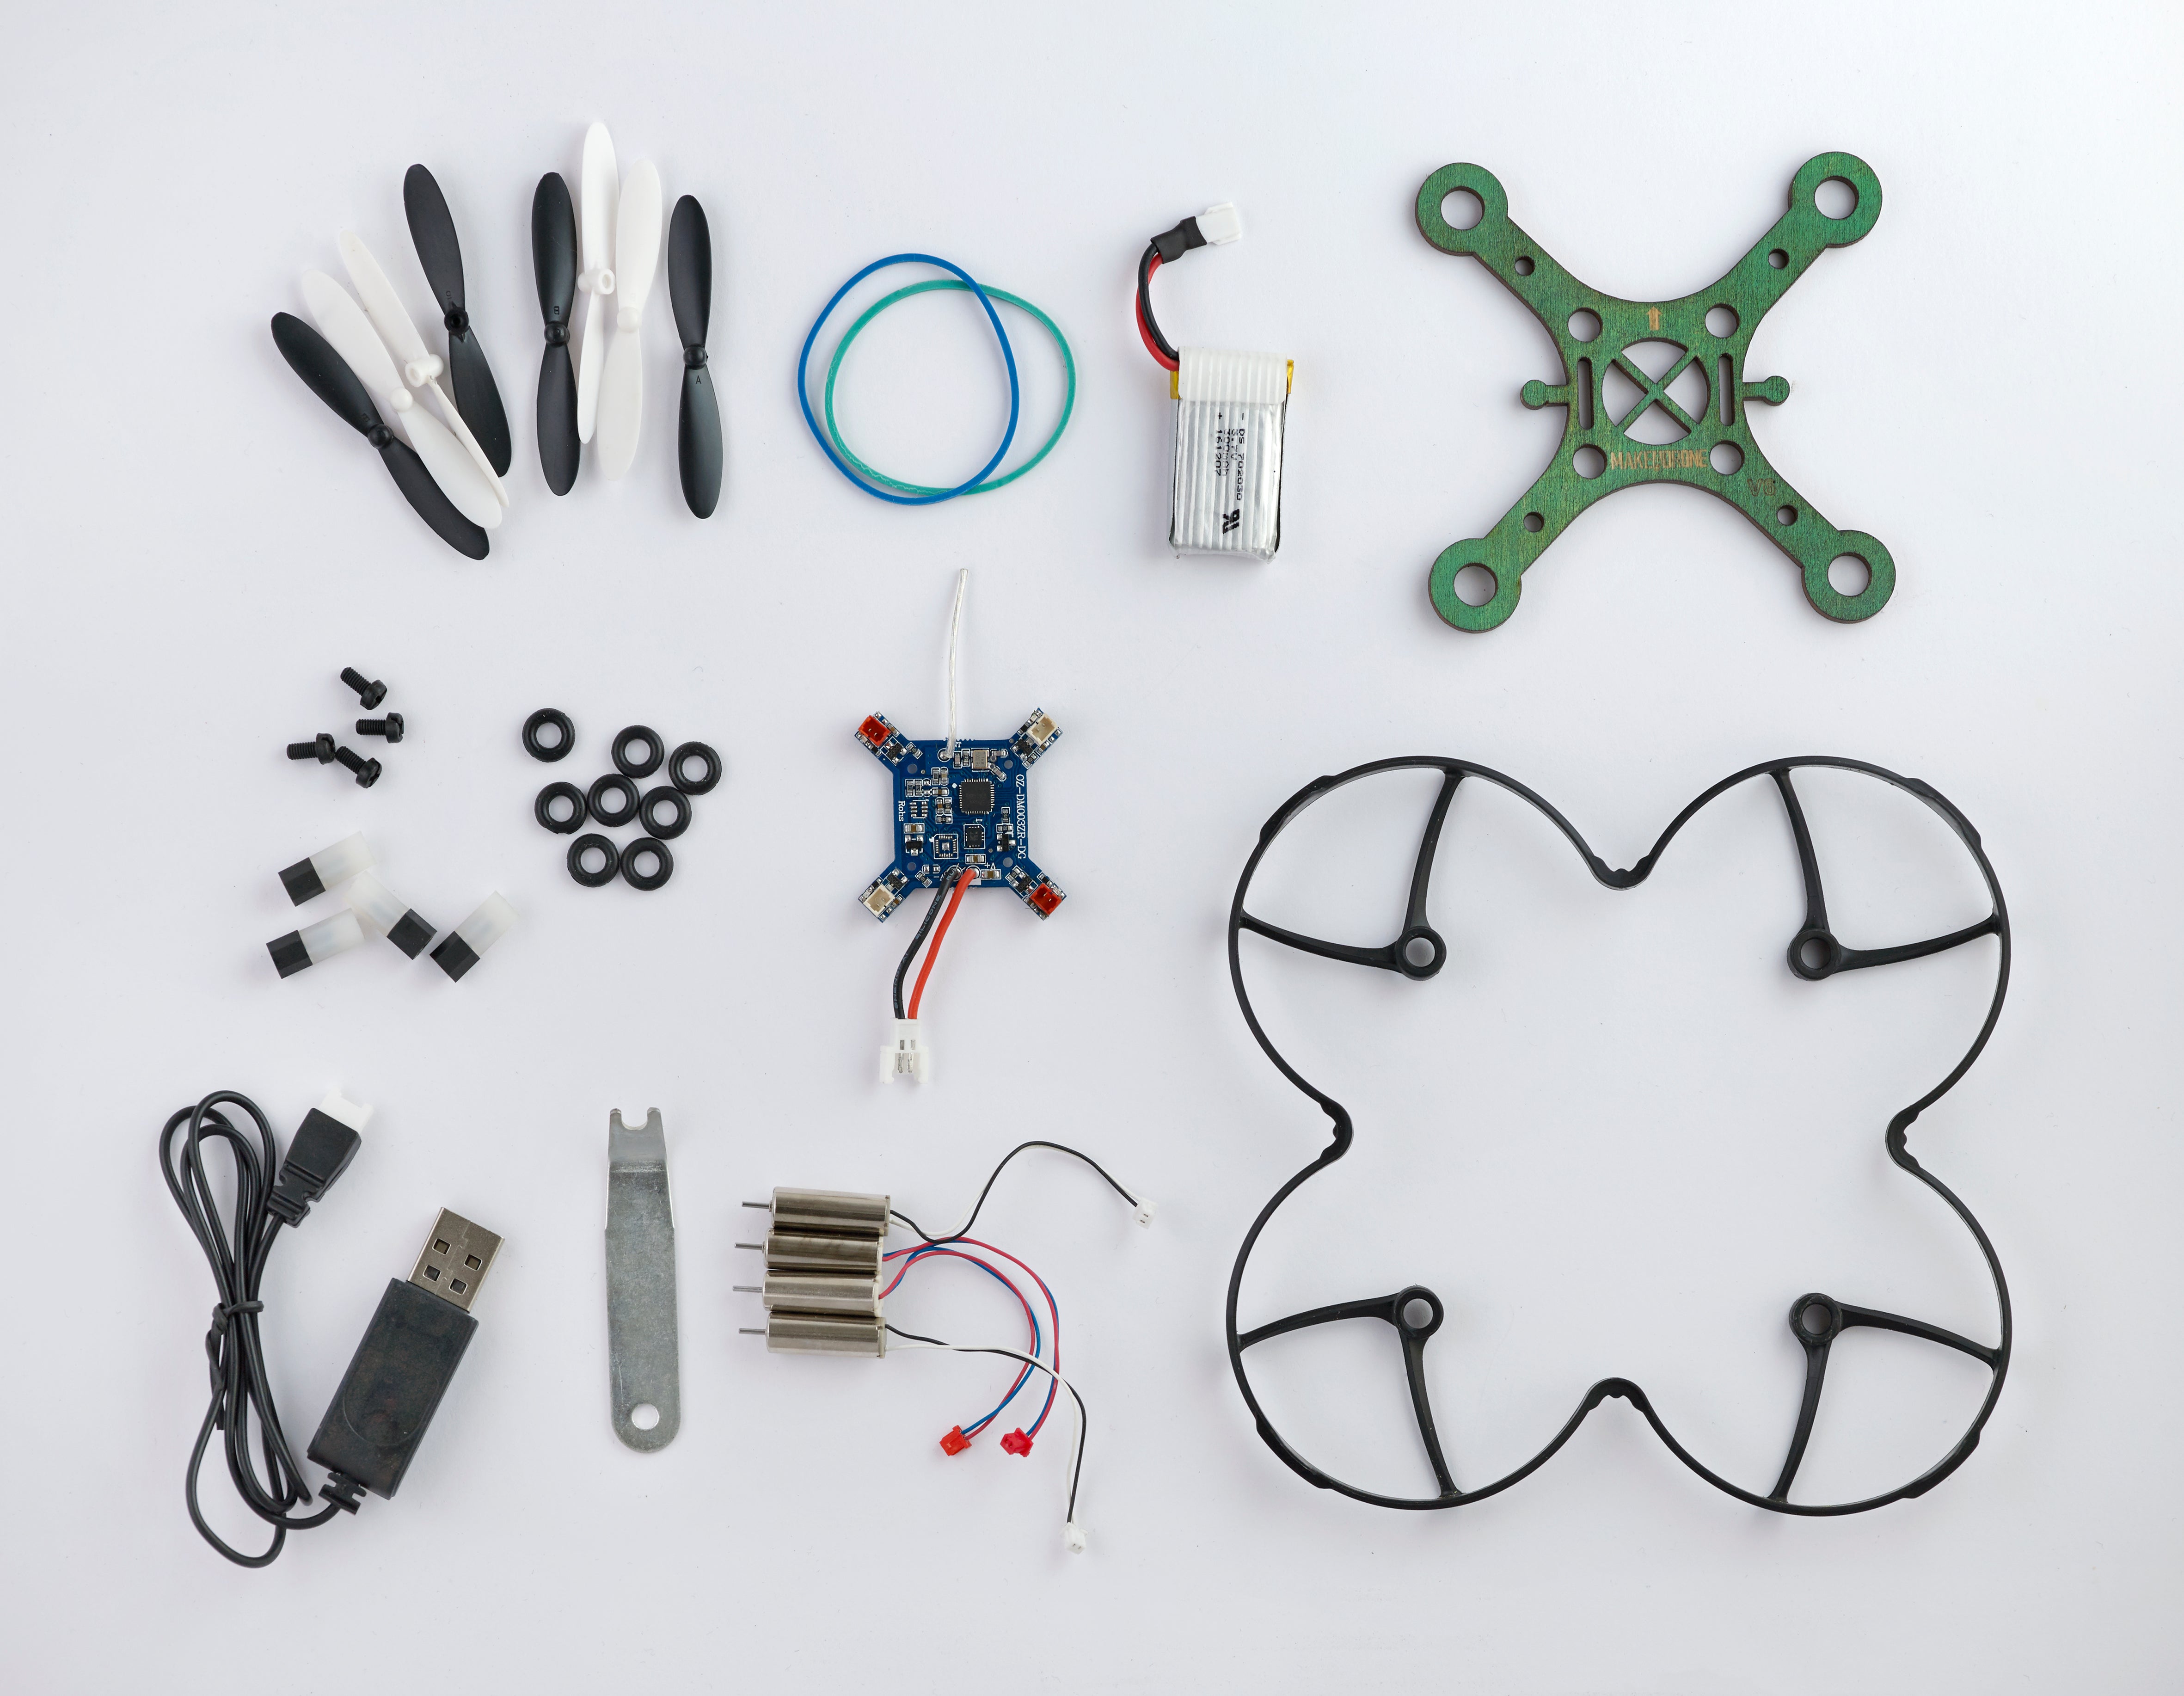 Hummingbird Makerspace Package: 6 hummingbird drone building kit, for laser cutter or 3D printer